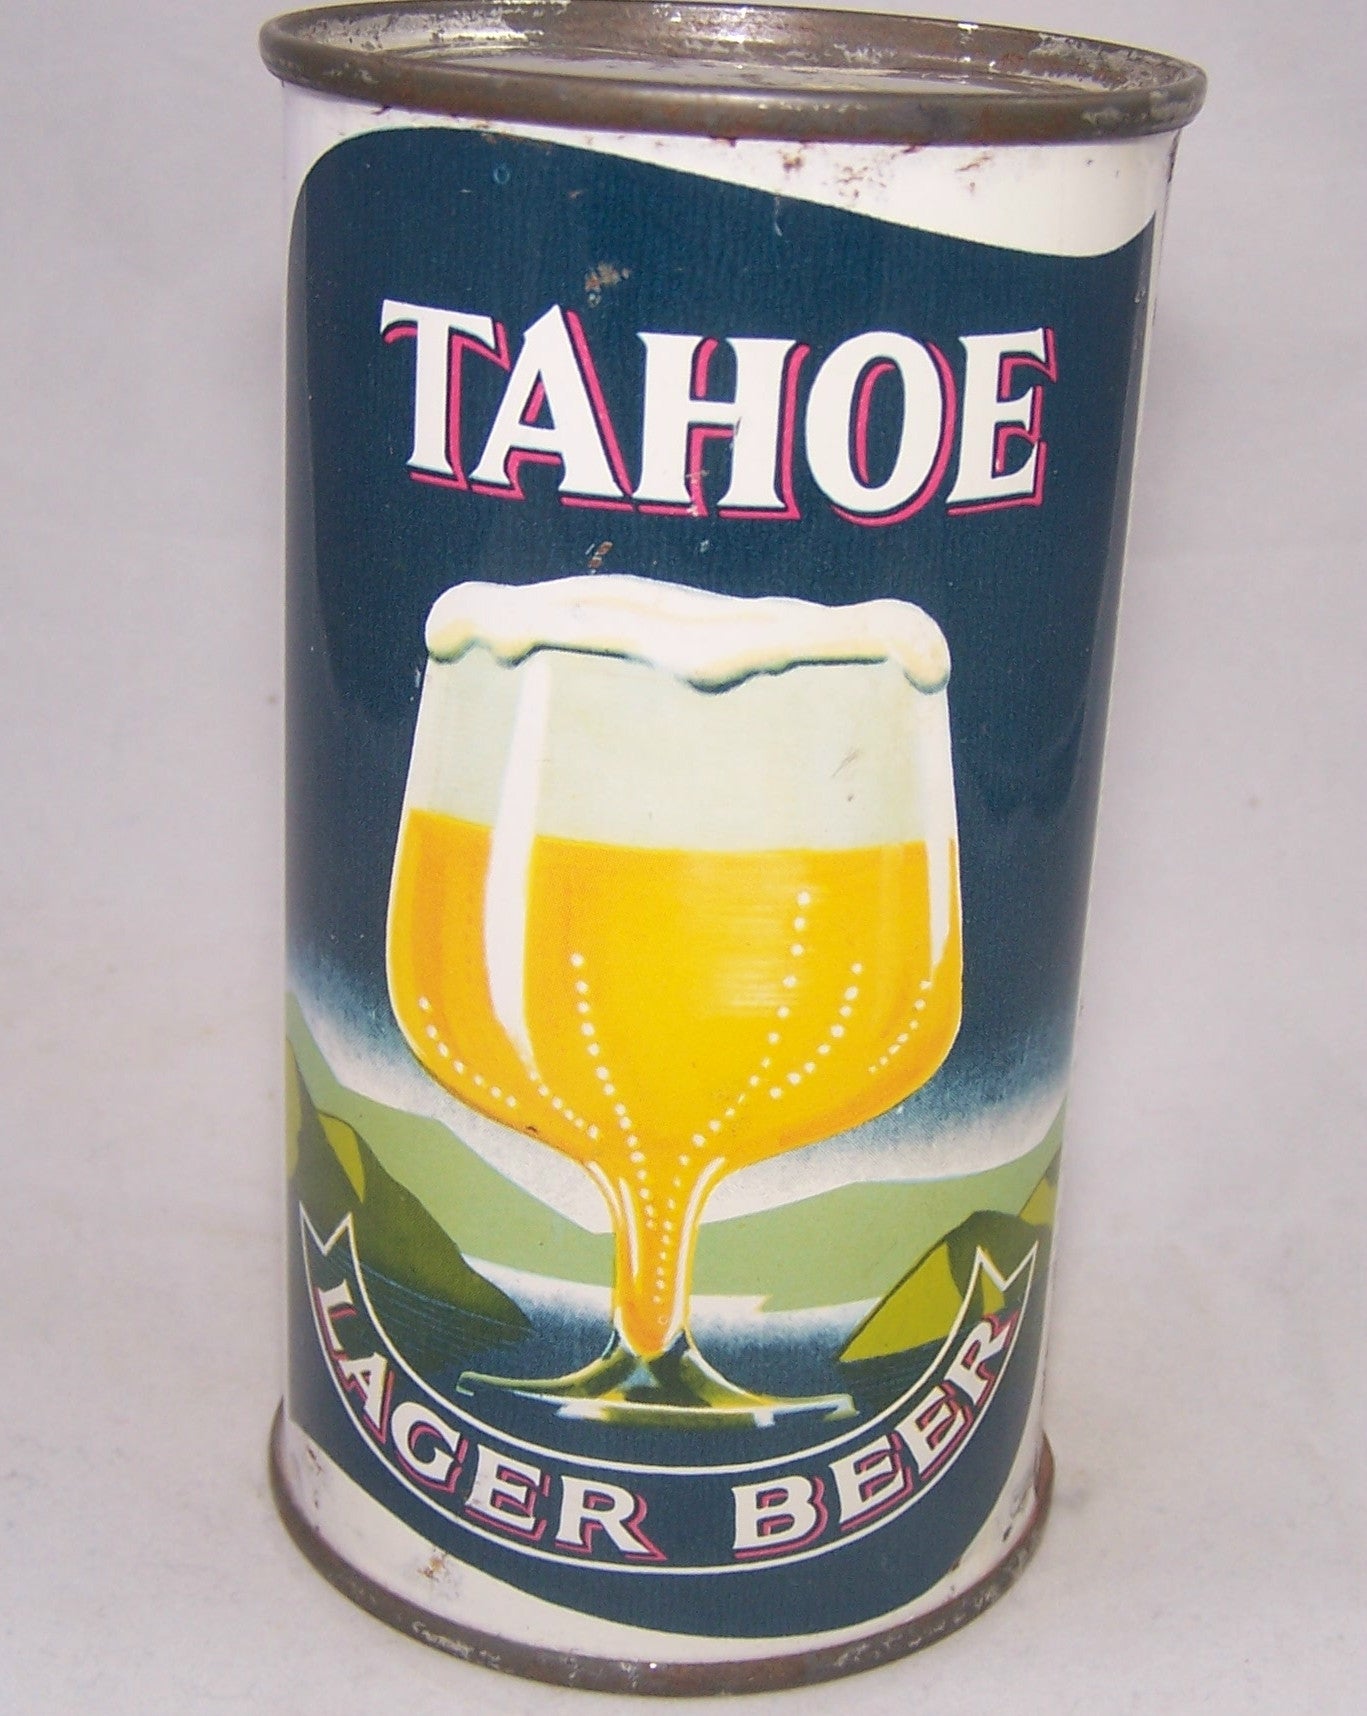 Tahoe Lager Beer, USBC 138-08, Grade 1/1- Sold on 05/21/18